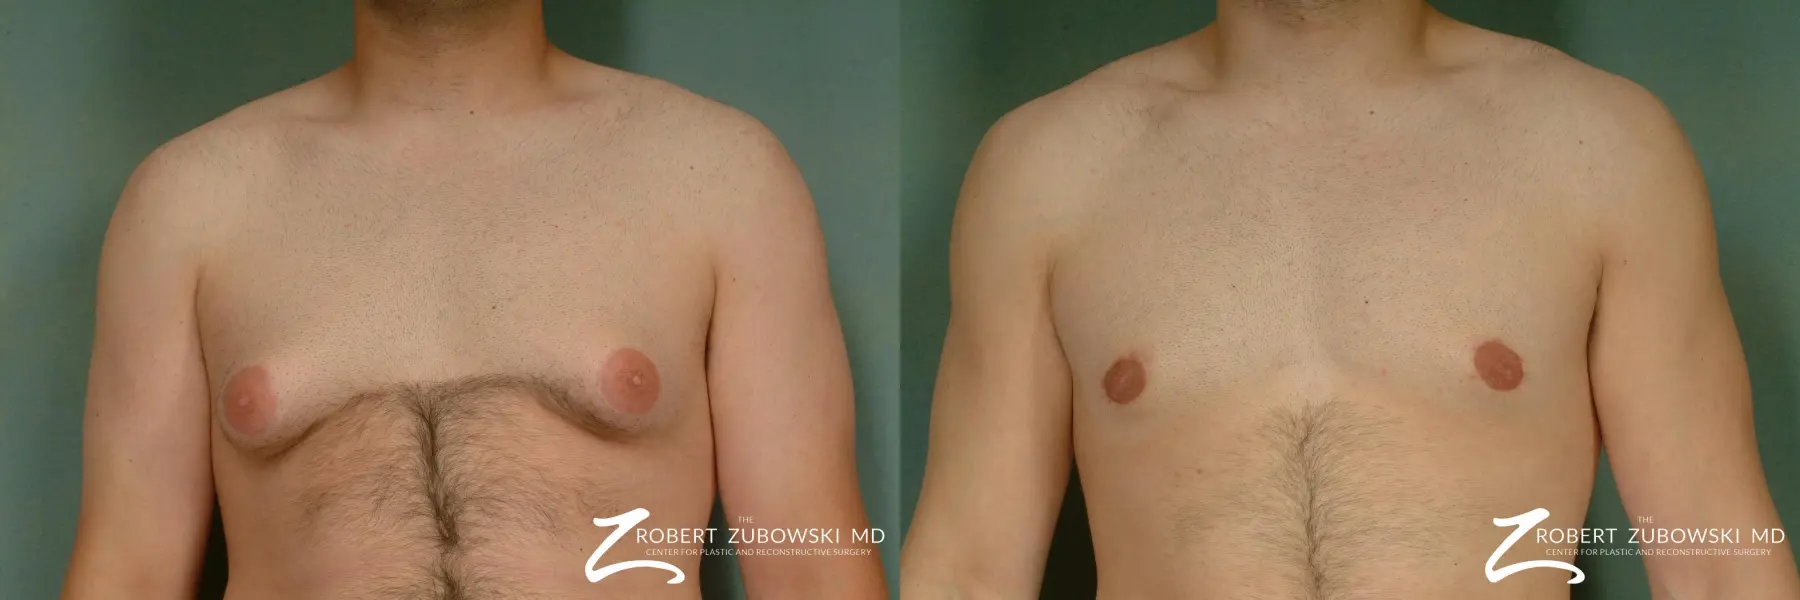 Why Women (and Men) Choose Breast Reduction - North Texas Plastic Surgery